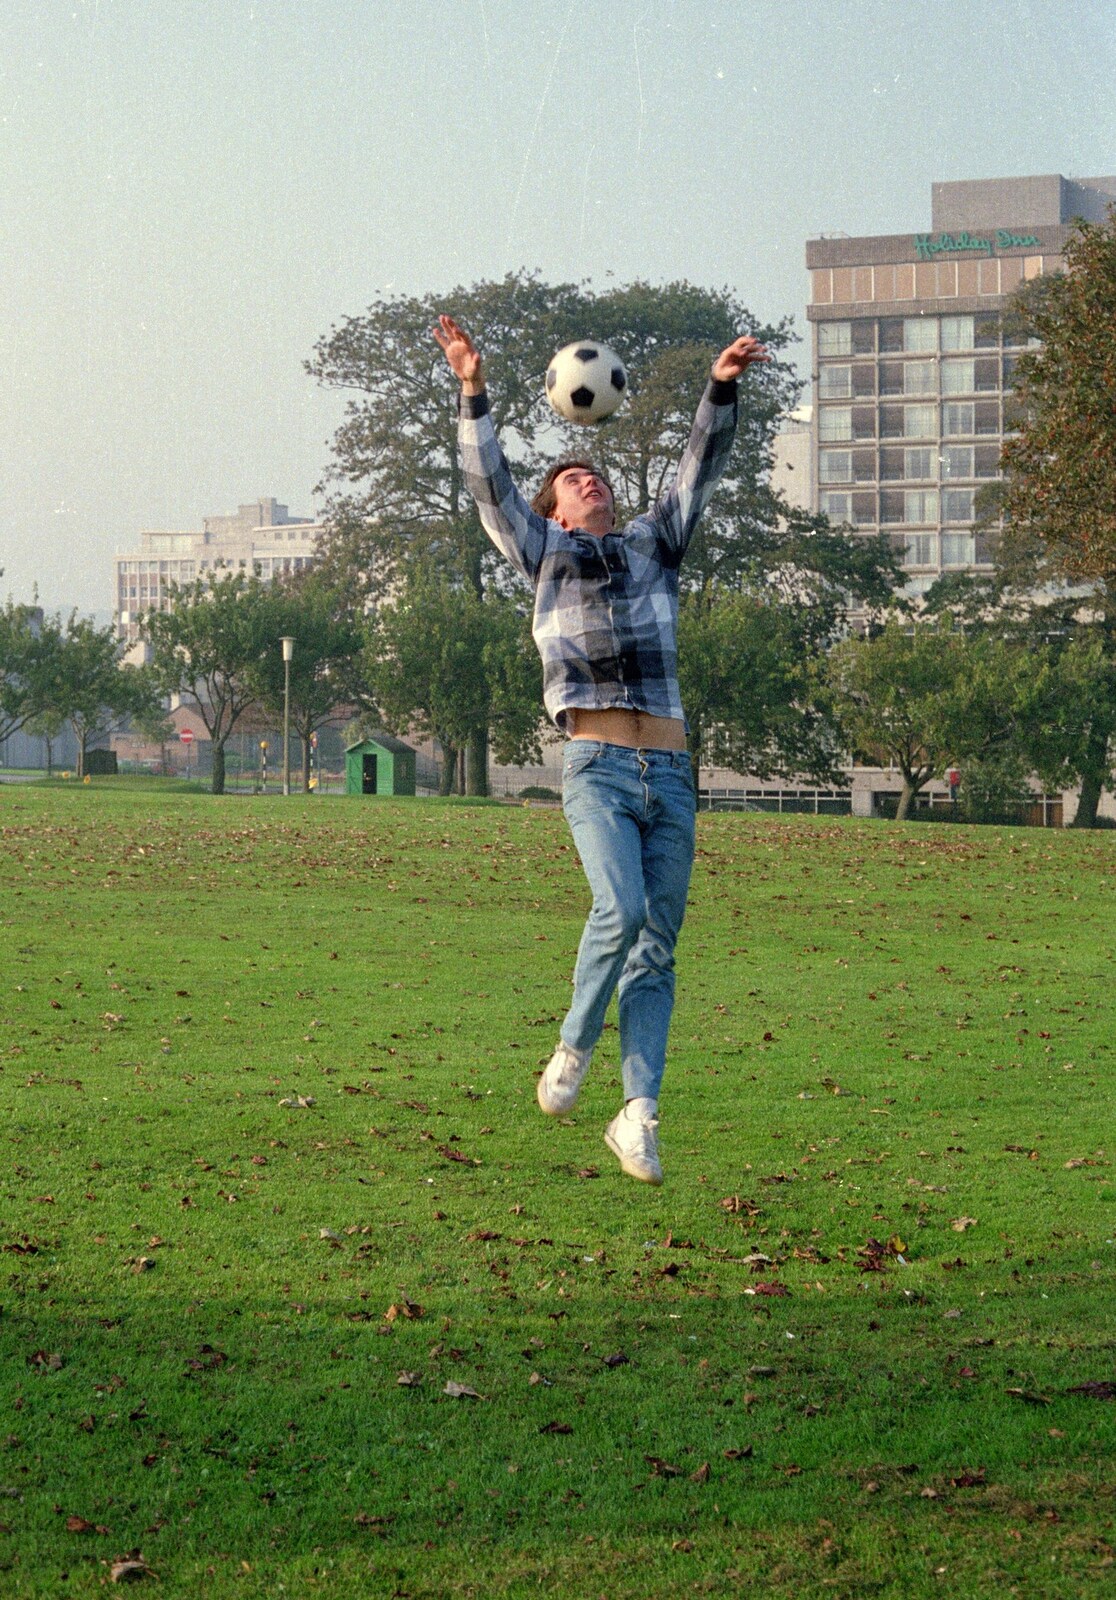 Riki heads the ball from Uni: A Plymouth Hoe Kickabout, Plymouth, Devon - 20th October 1986